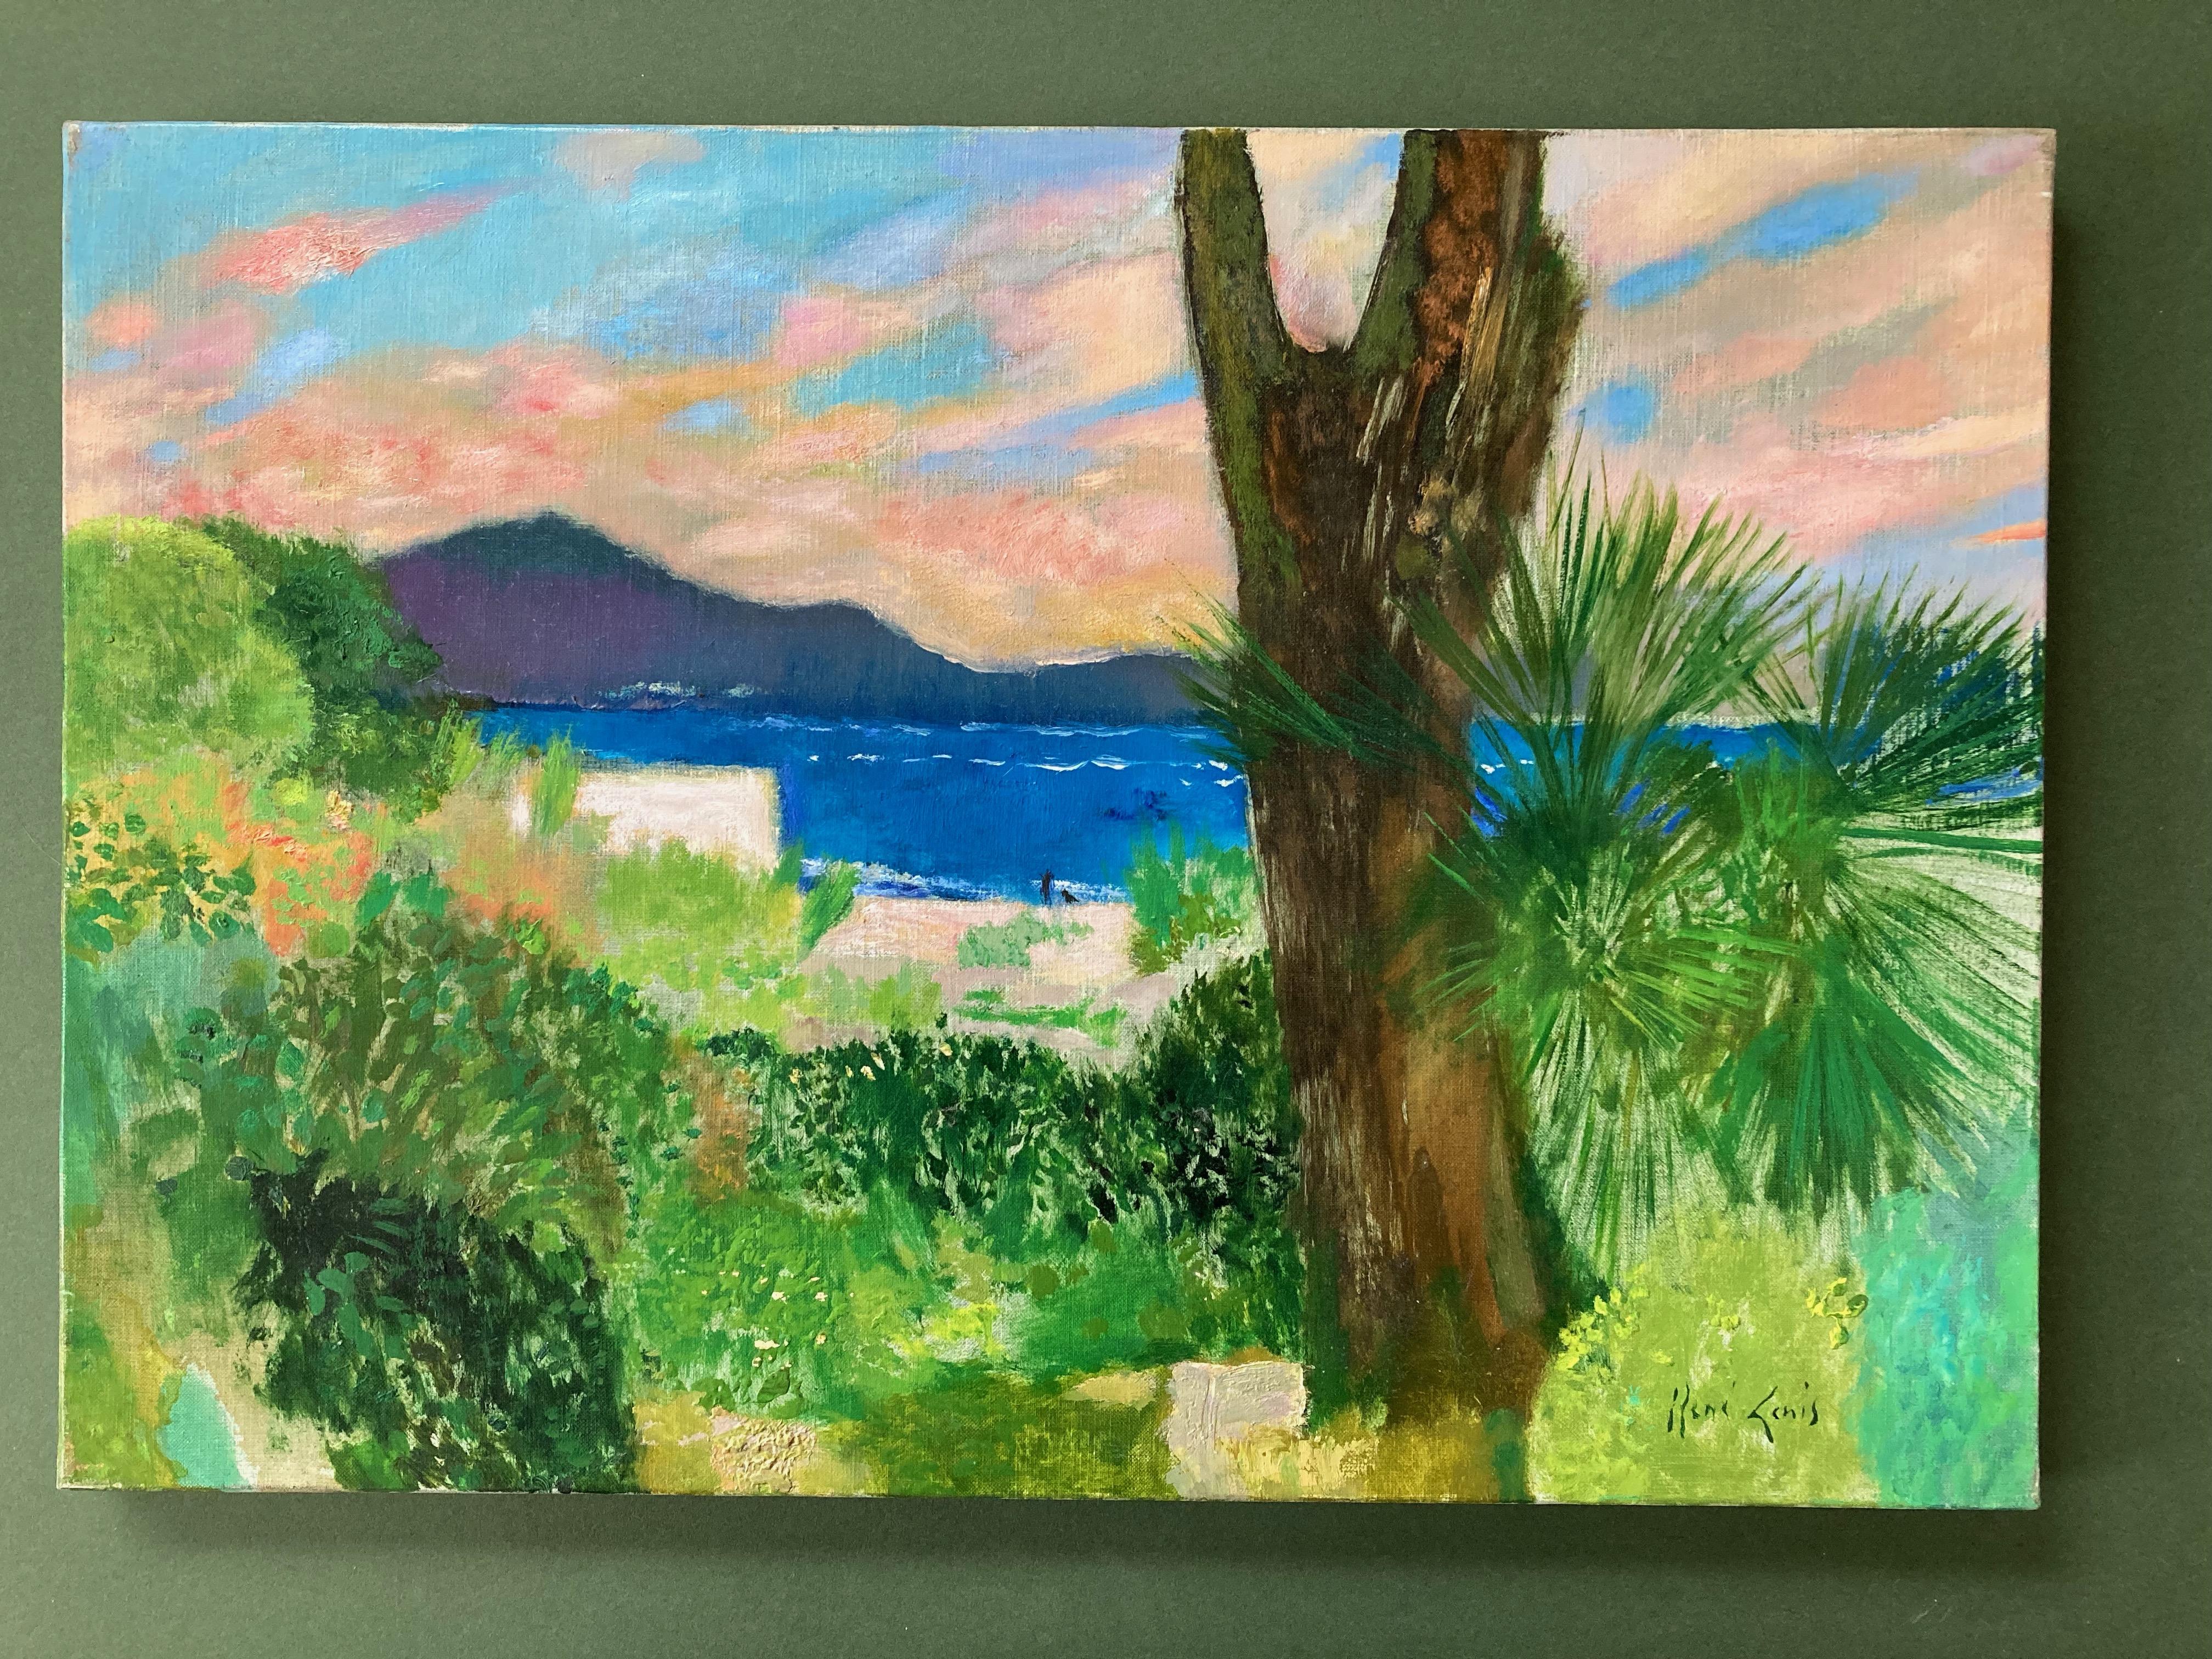 This striking view is of the elegant town of Bandol on the Cote D'Azure which was a favourite haunt of Thomas Mann and Aldous Huxley.

René Genis (1922-2004)
Le Jardin de Bandol
Signed and inscribed with title verso
Oil on canvas, unframed
15 x 21